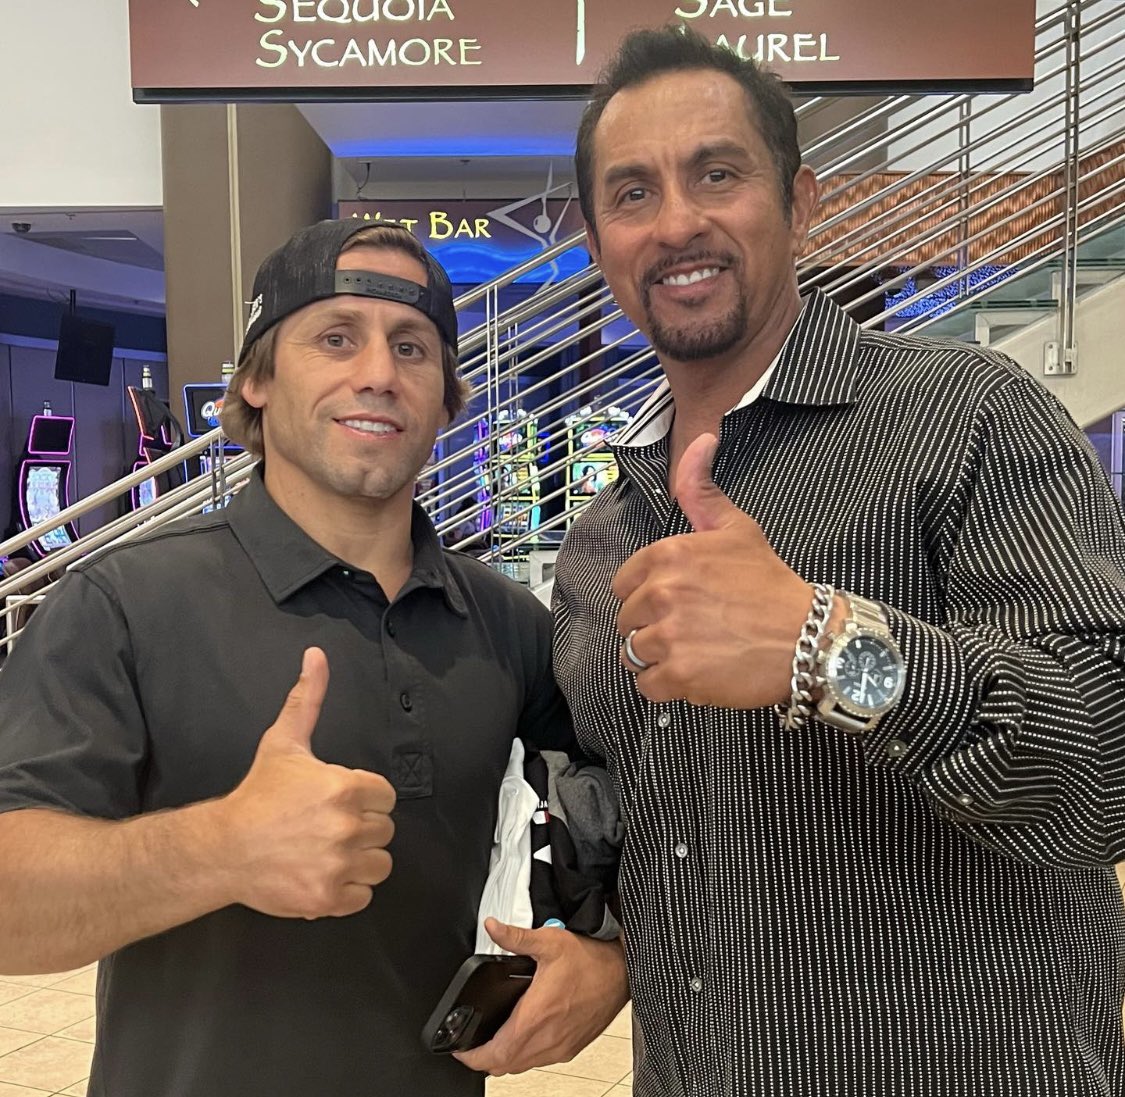 ALWAYS Thumbs Up For RICHIE 👍🏼👍🏼 With #MMA Legend The @ufc Veteran @UrijahFaber 👊🏼 #EveryFighterHasAVoice #TheFightersVoice #TheOnlyVoiceThatMatters #TU4R 😇 @A1combat @UFCFightPass @Tachipalace